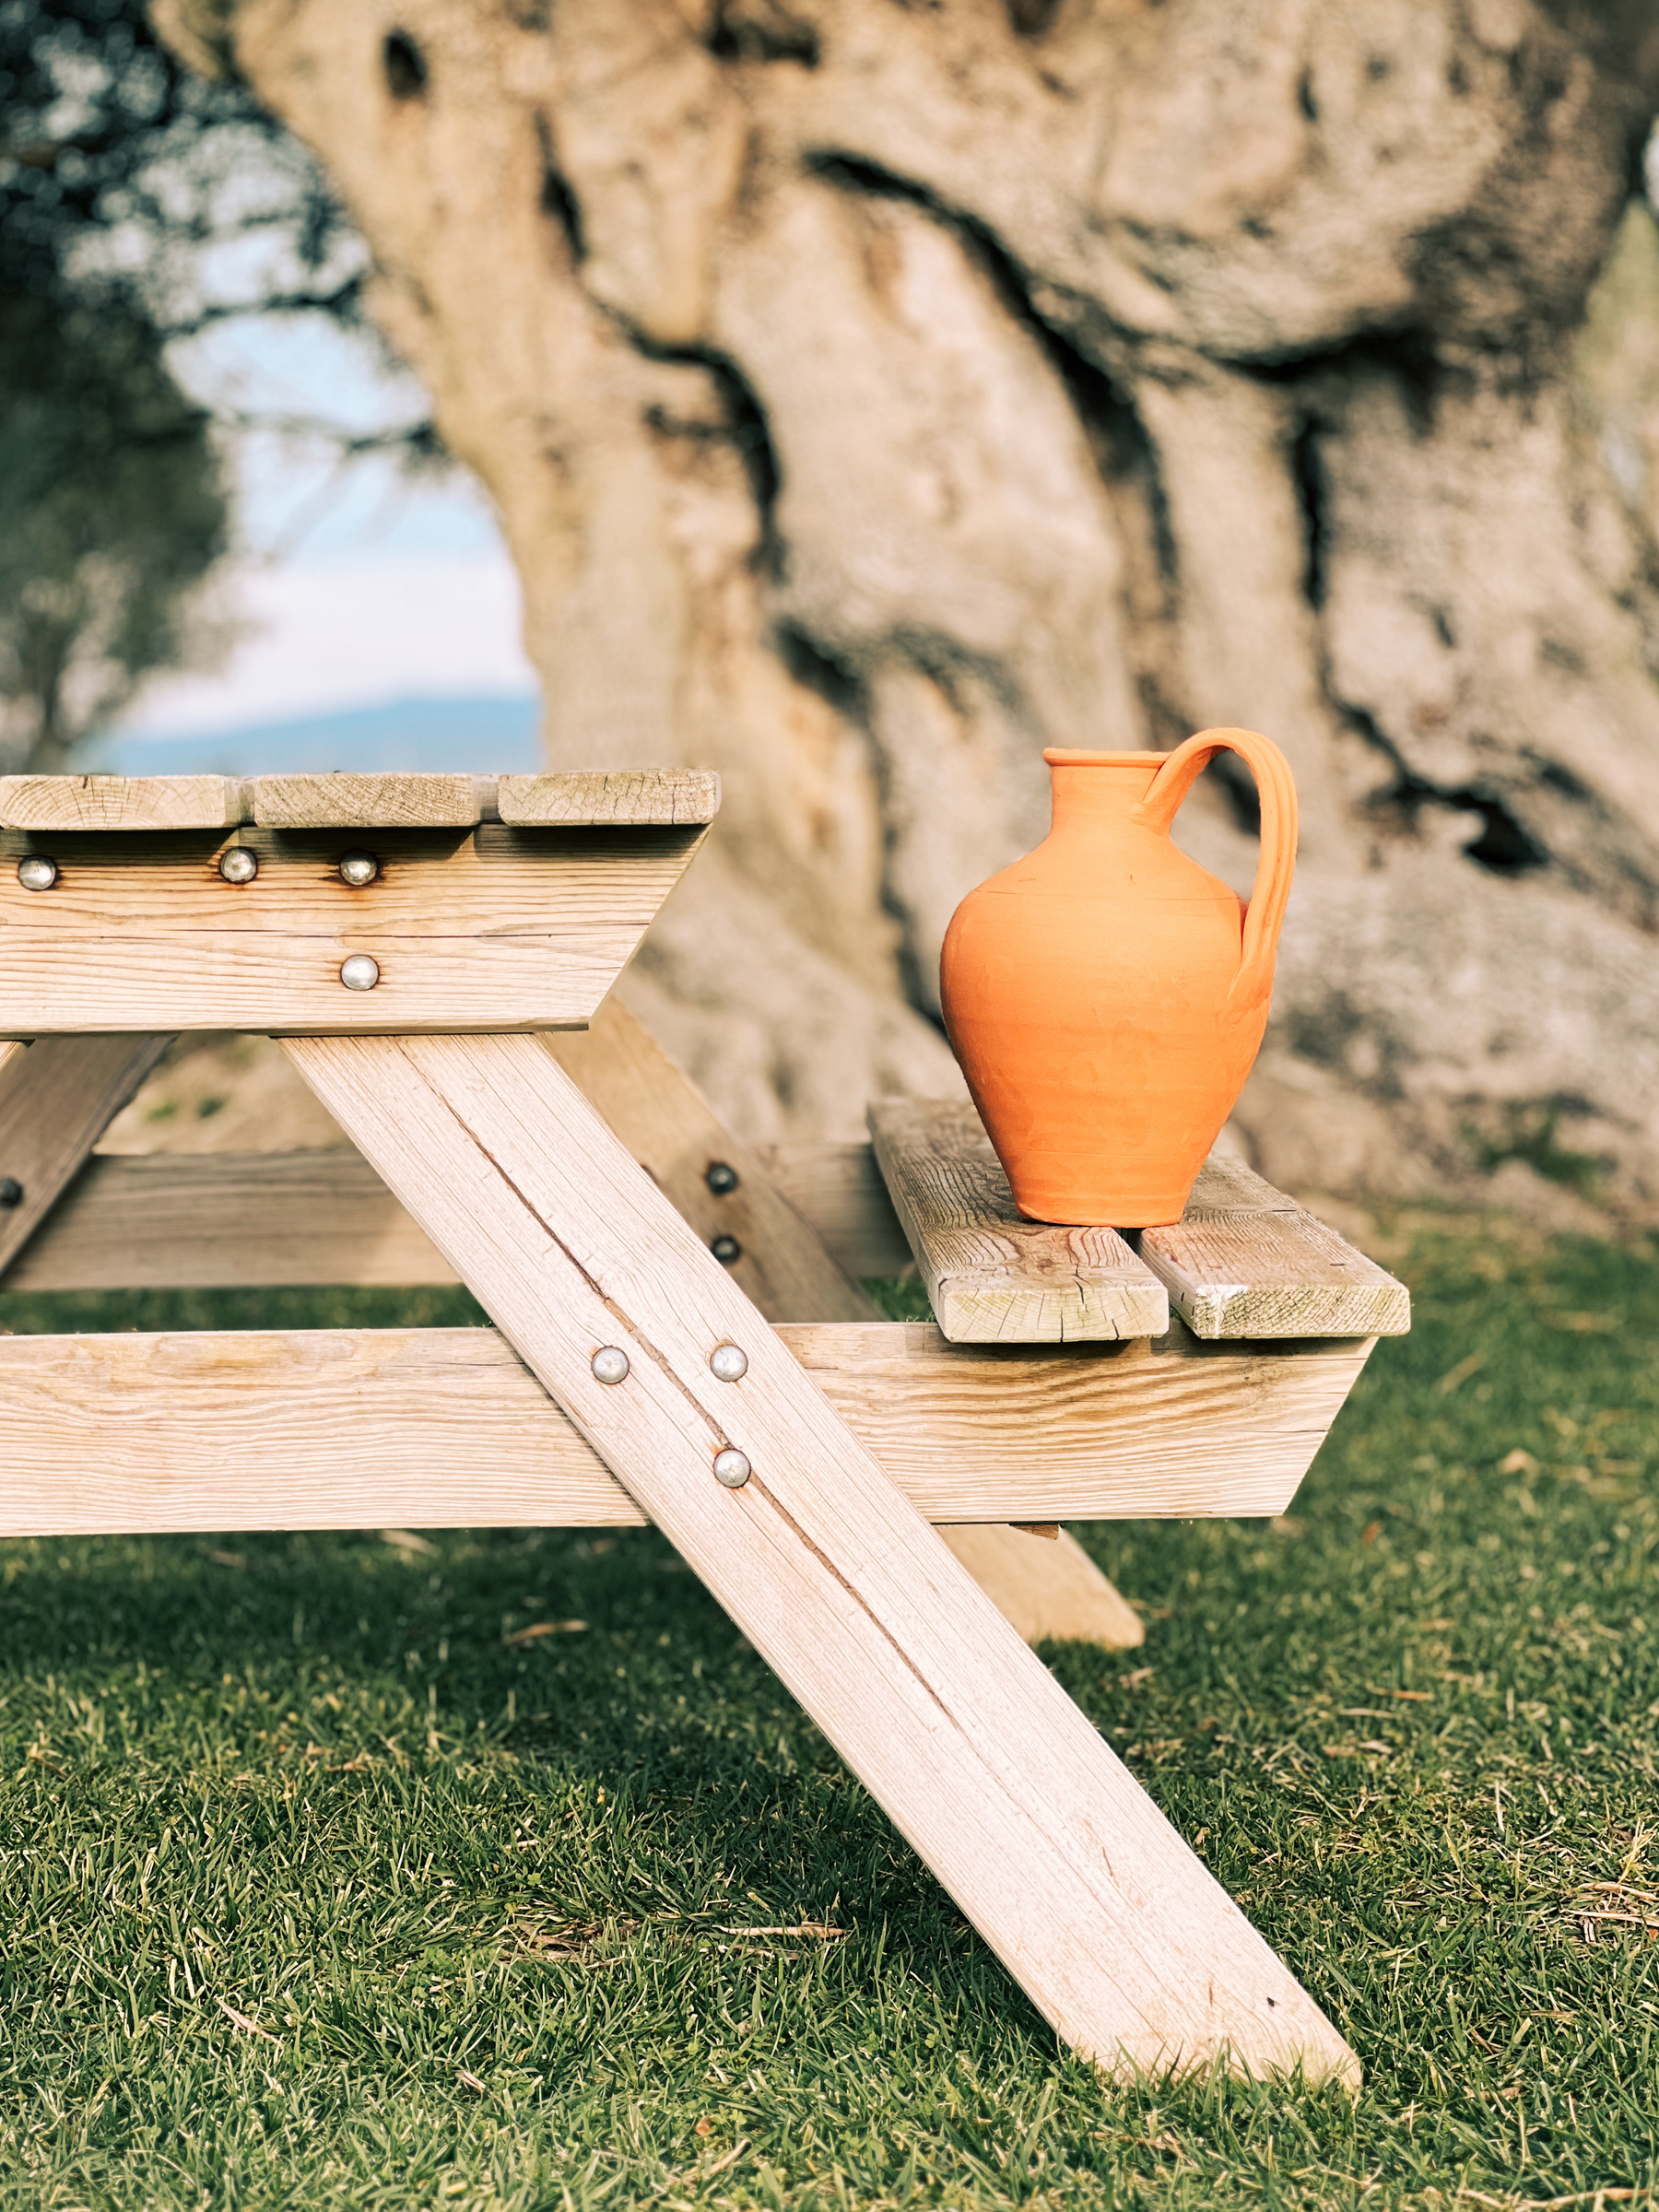 An orange terracotta pitcher placed on a wooden picnic bench with an old olive tree trunk in the background.